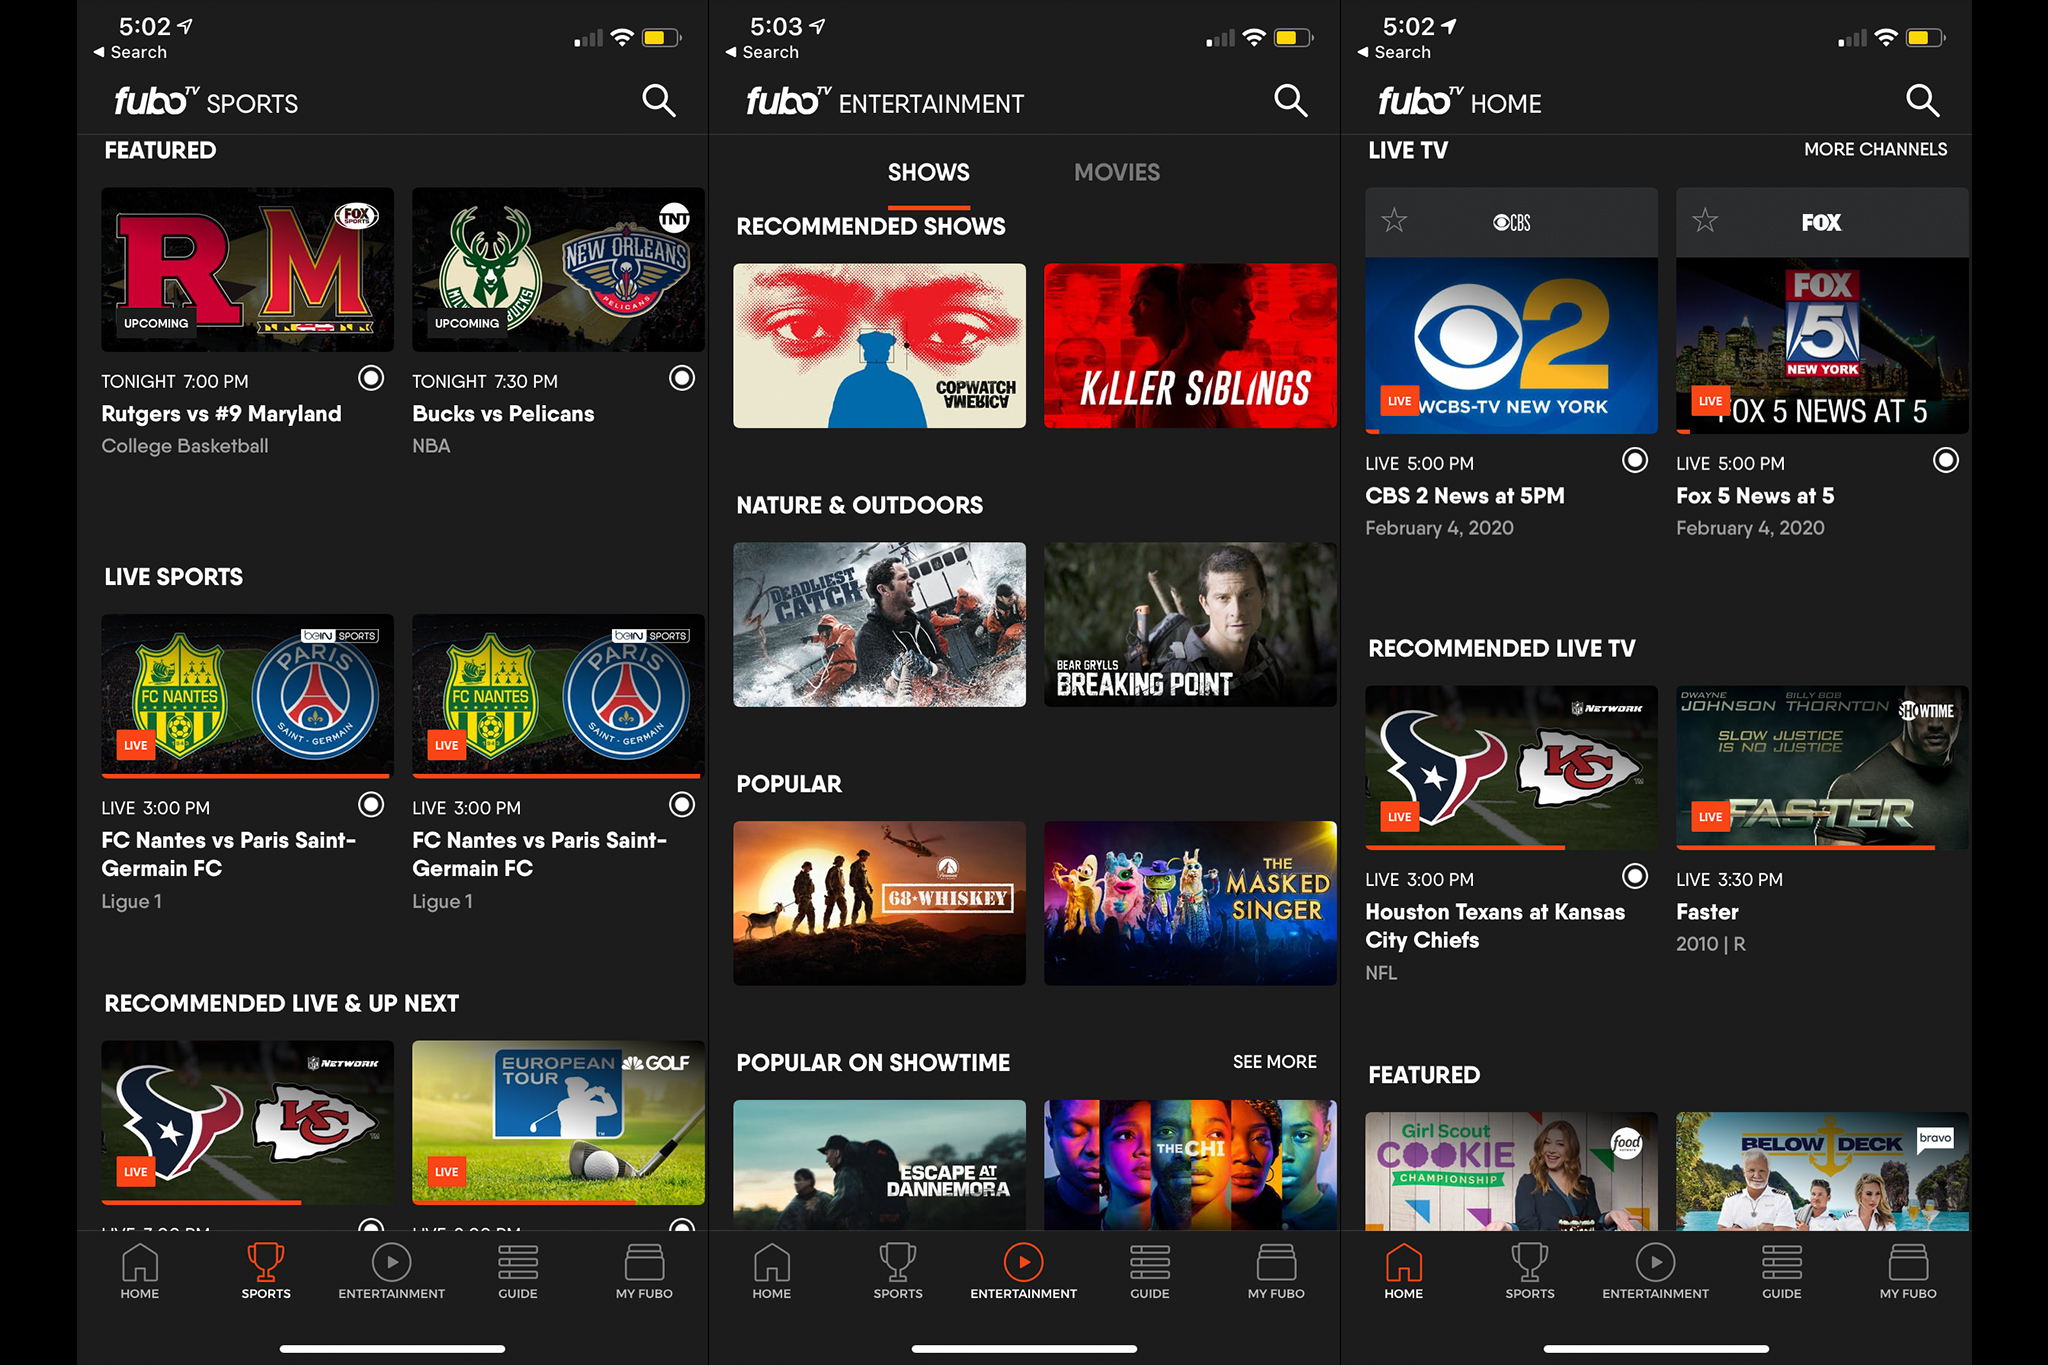 fuboTV is a popular IPTV Service used by thousands of cord-cutters across the world for watching live channels.